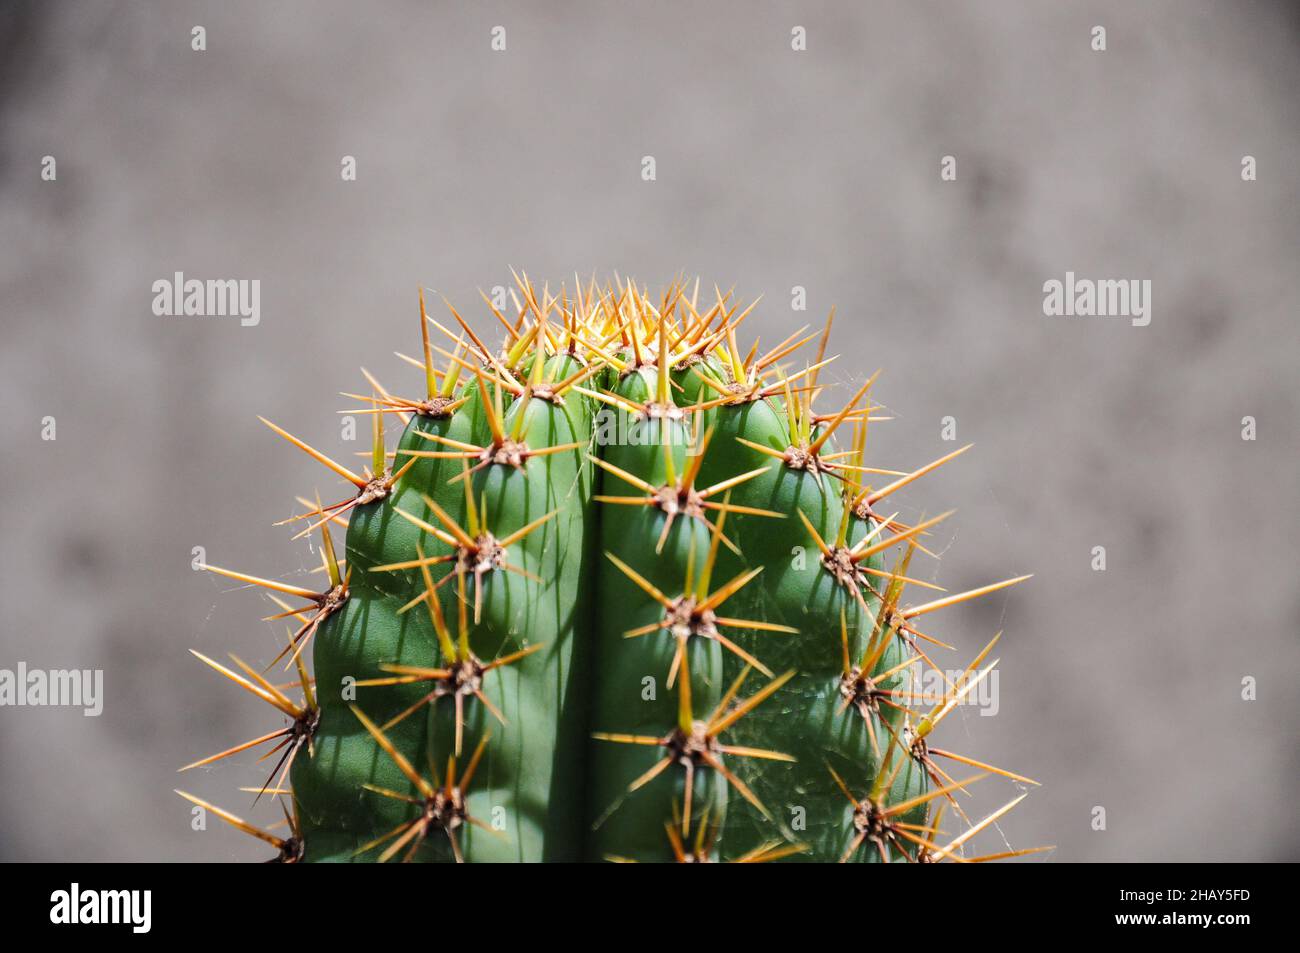 Cactus full of thorns in the backyard of a house in Juan Lacaze, Colonia, Uruguay. Stock Photo